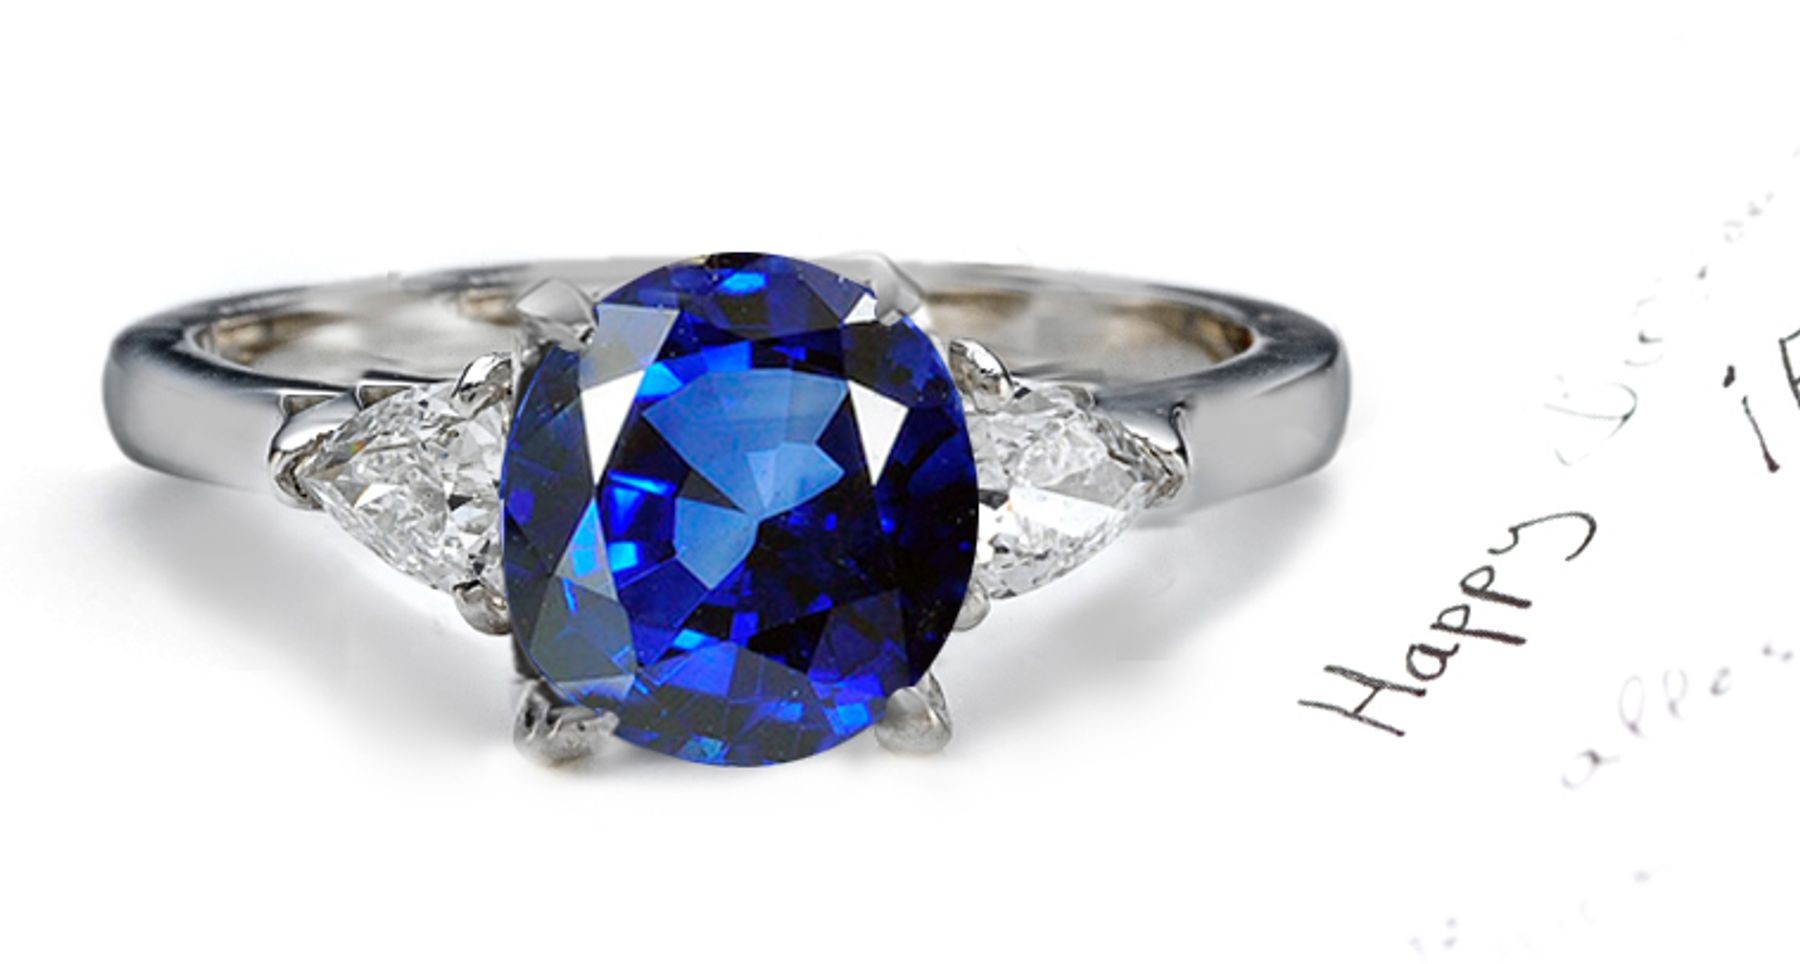 Truly Charming & Enchanting: Sparkling 1.06 Carat Rare Fine Deep Royal Sapphire Ring With Brilliant Diamond-Accent Ring